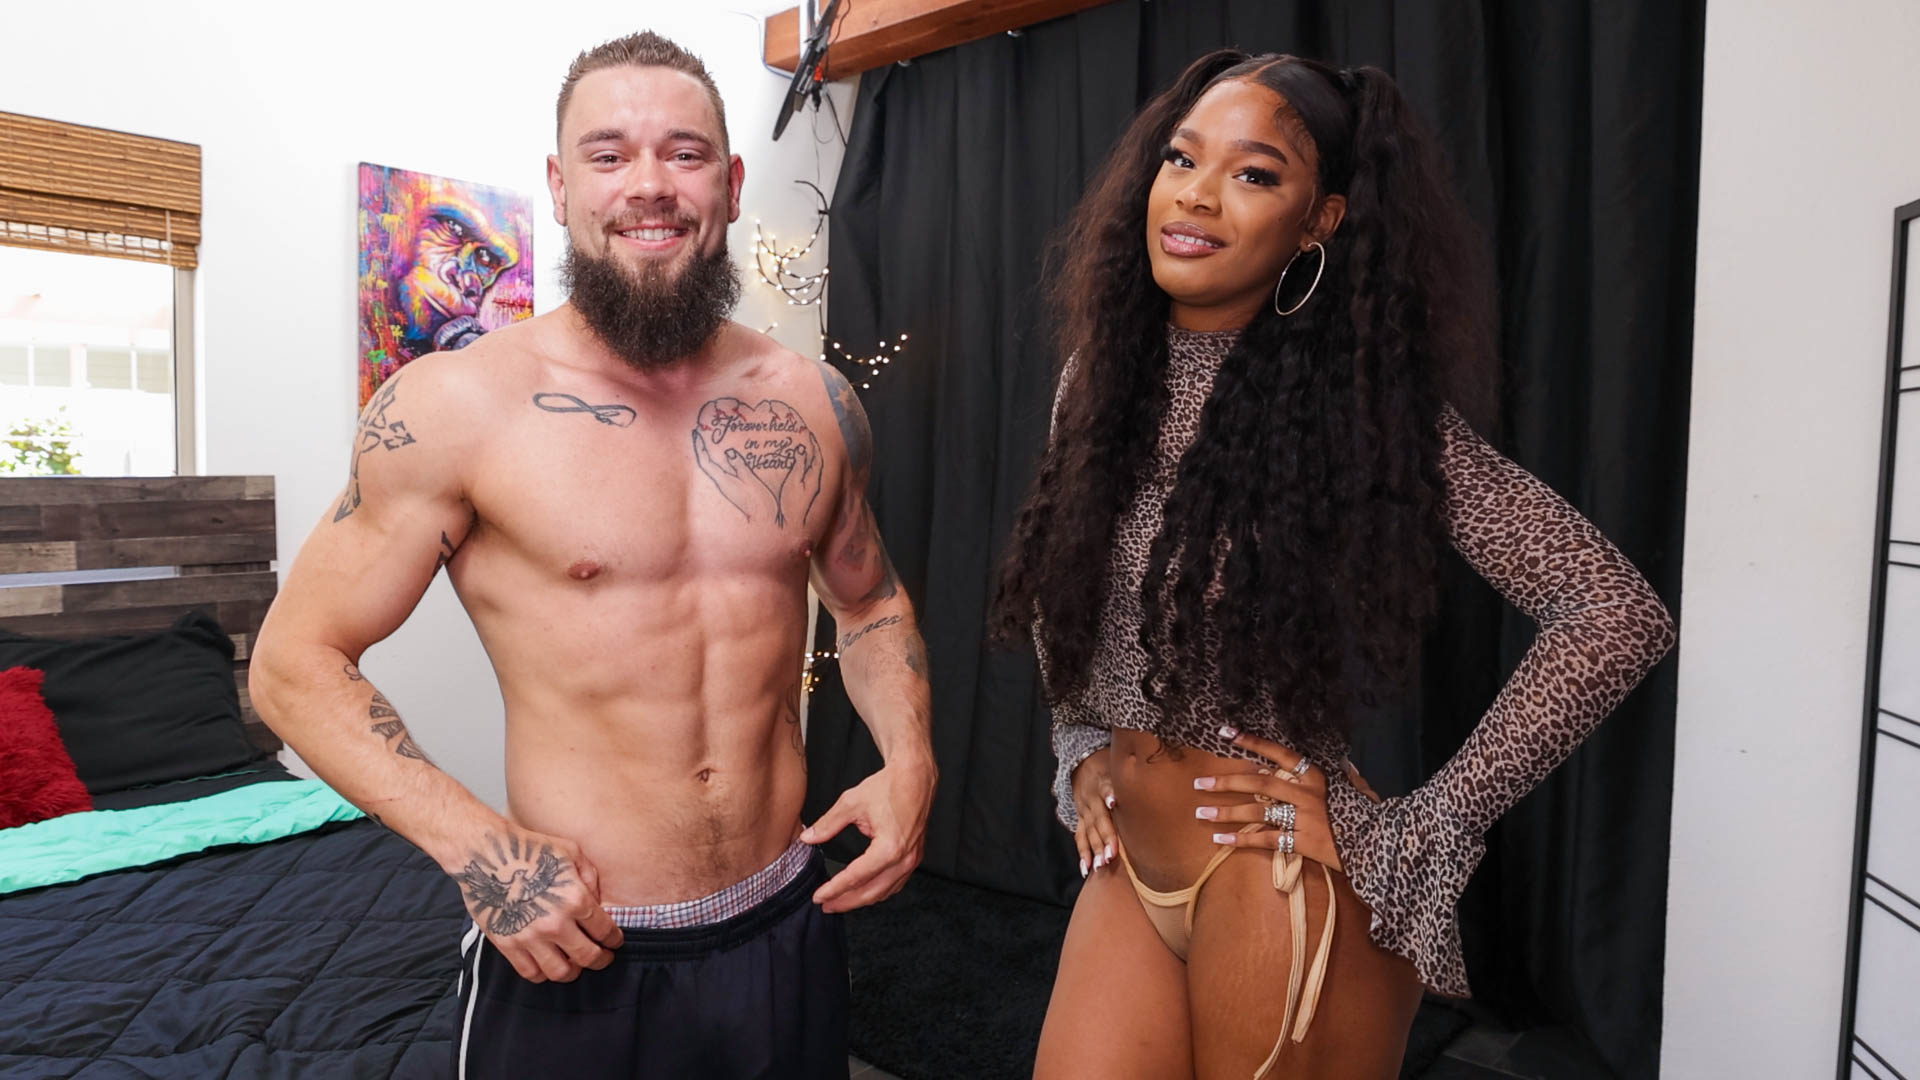 Brodie Graves and Brianna Moore Are Horny And Ready To FUCK at HotGuysFuck